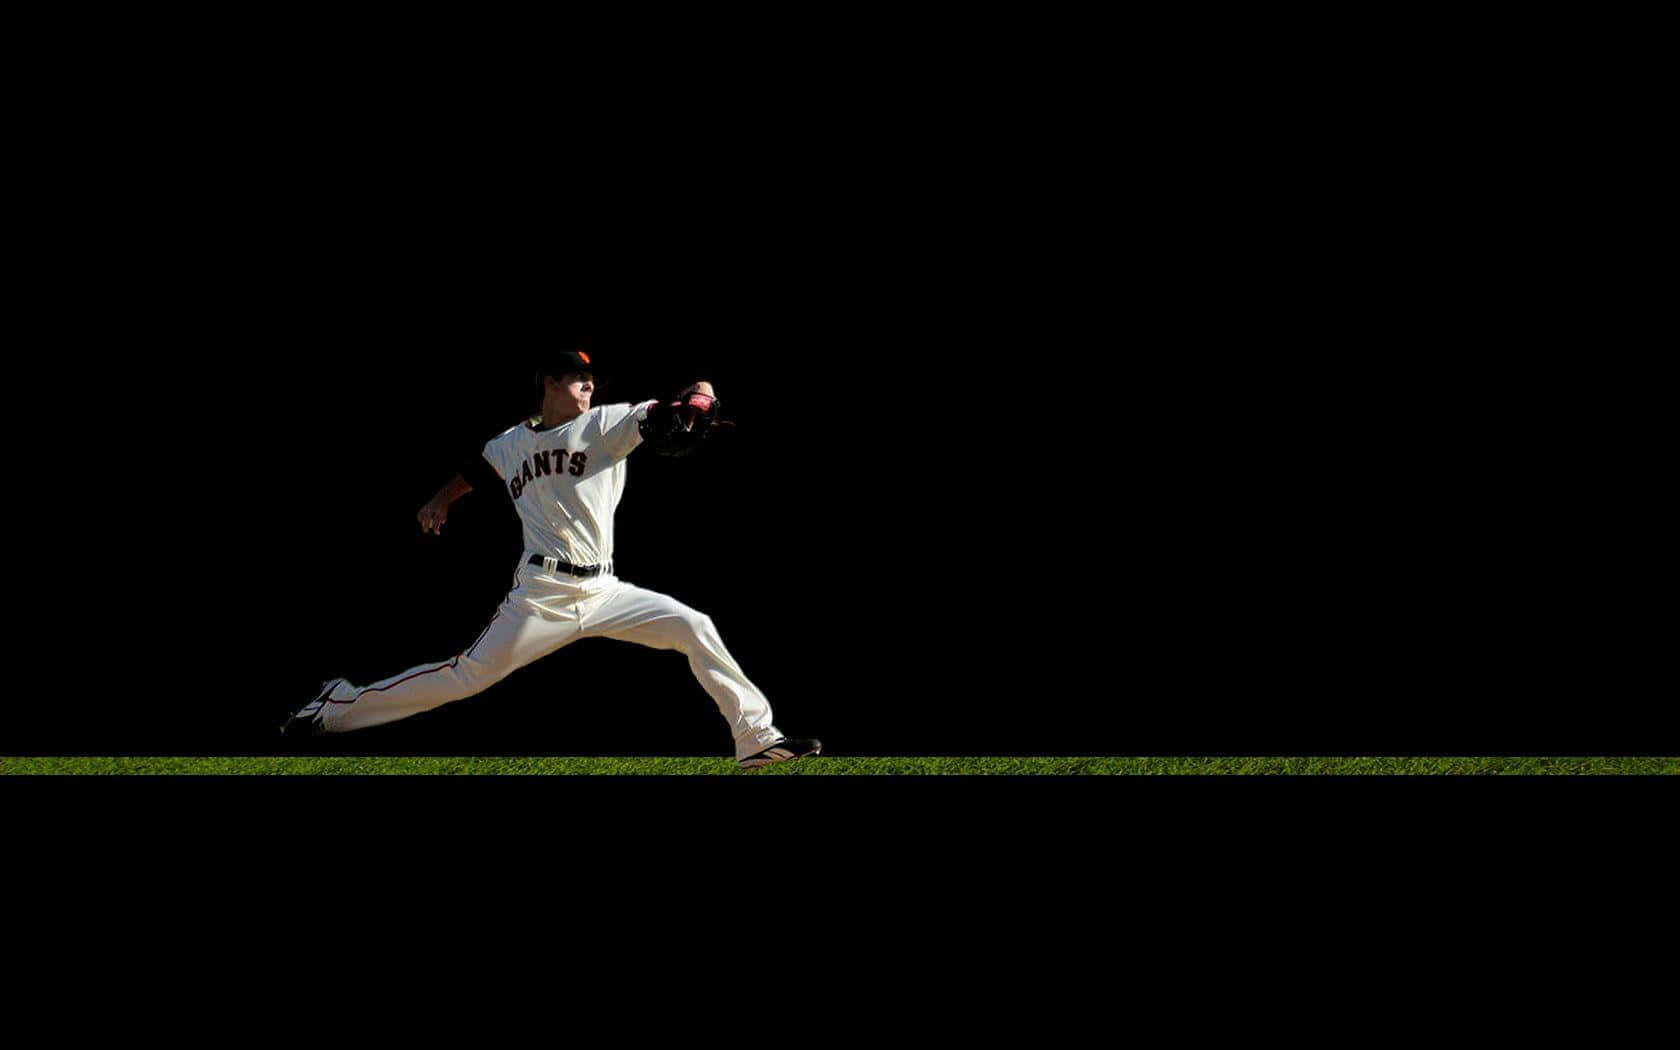 Professional Baseball Players Compete In An Intense Game Wallpaper